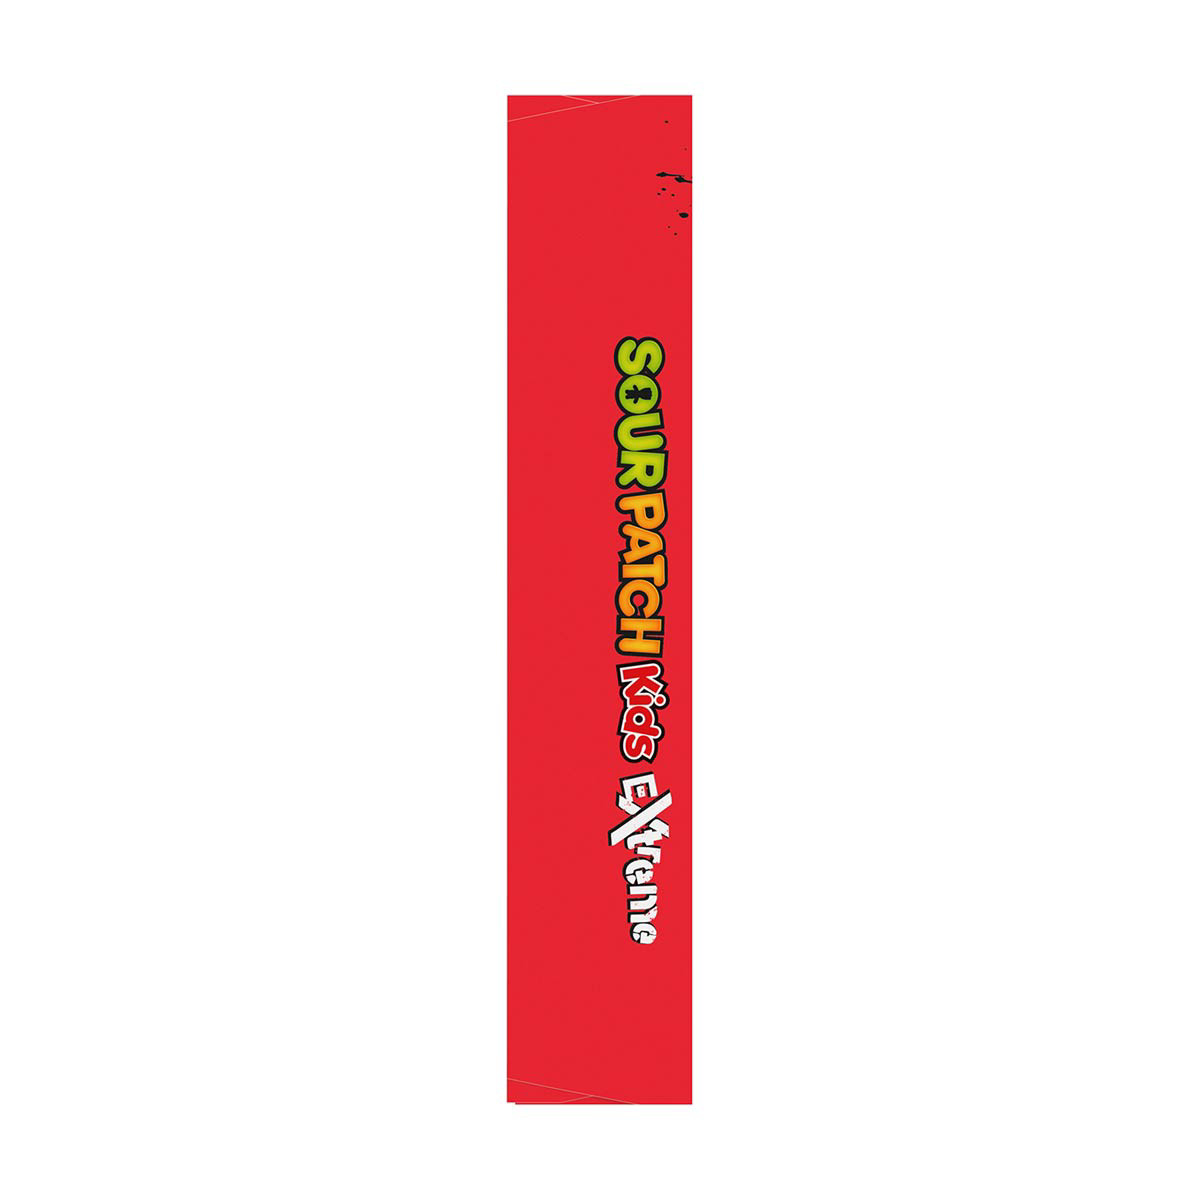 Sour Patch Kids Extreme Sour Soft & Chewy Candy, 3.5 oz